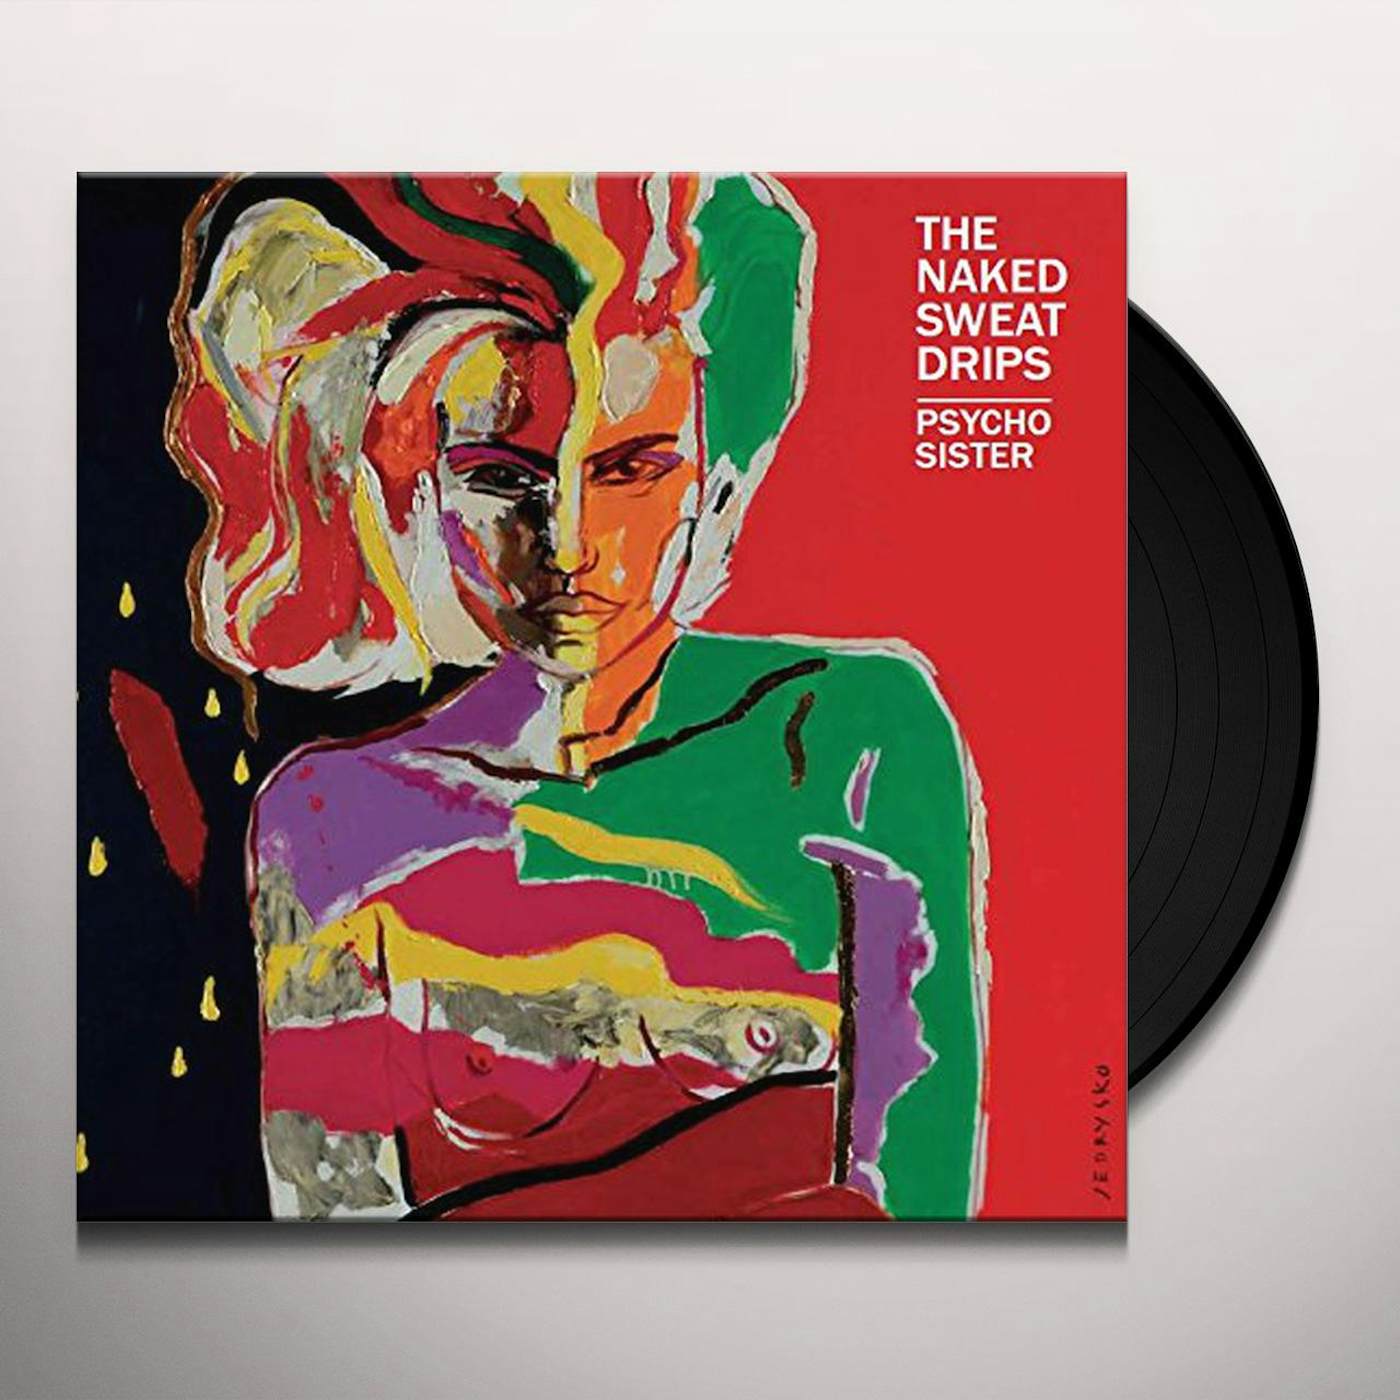 The Naked Sweat Drips Psycho Sister Vinyl Record